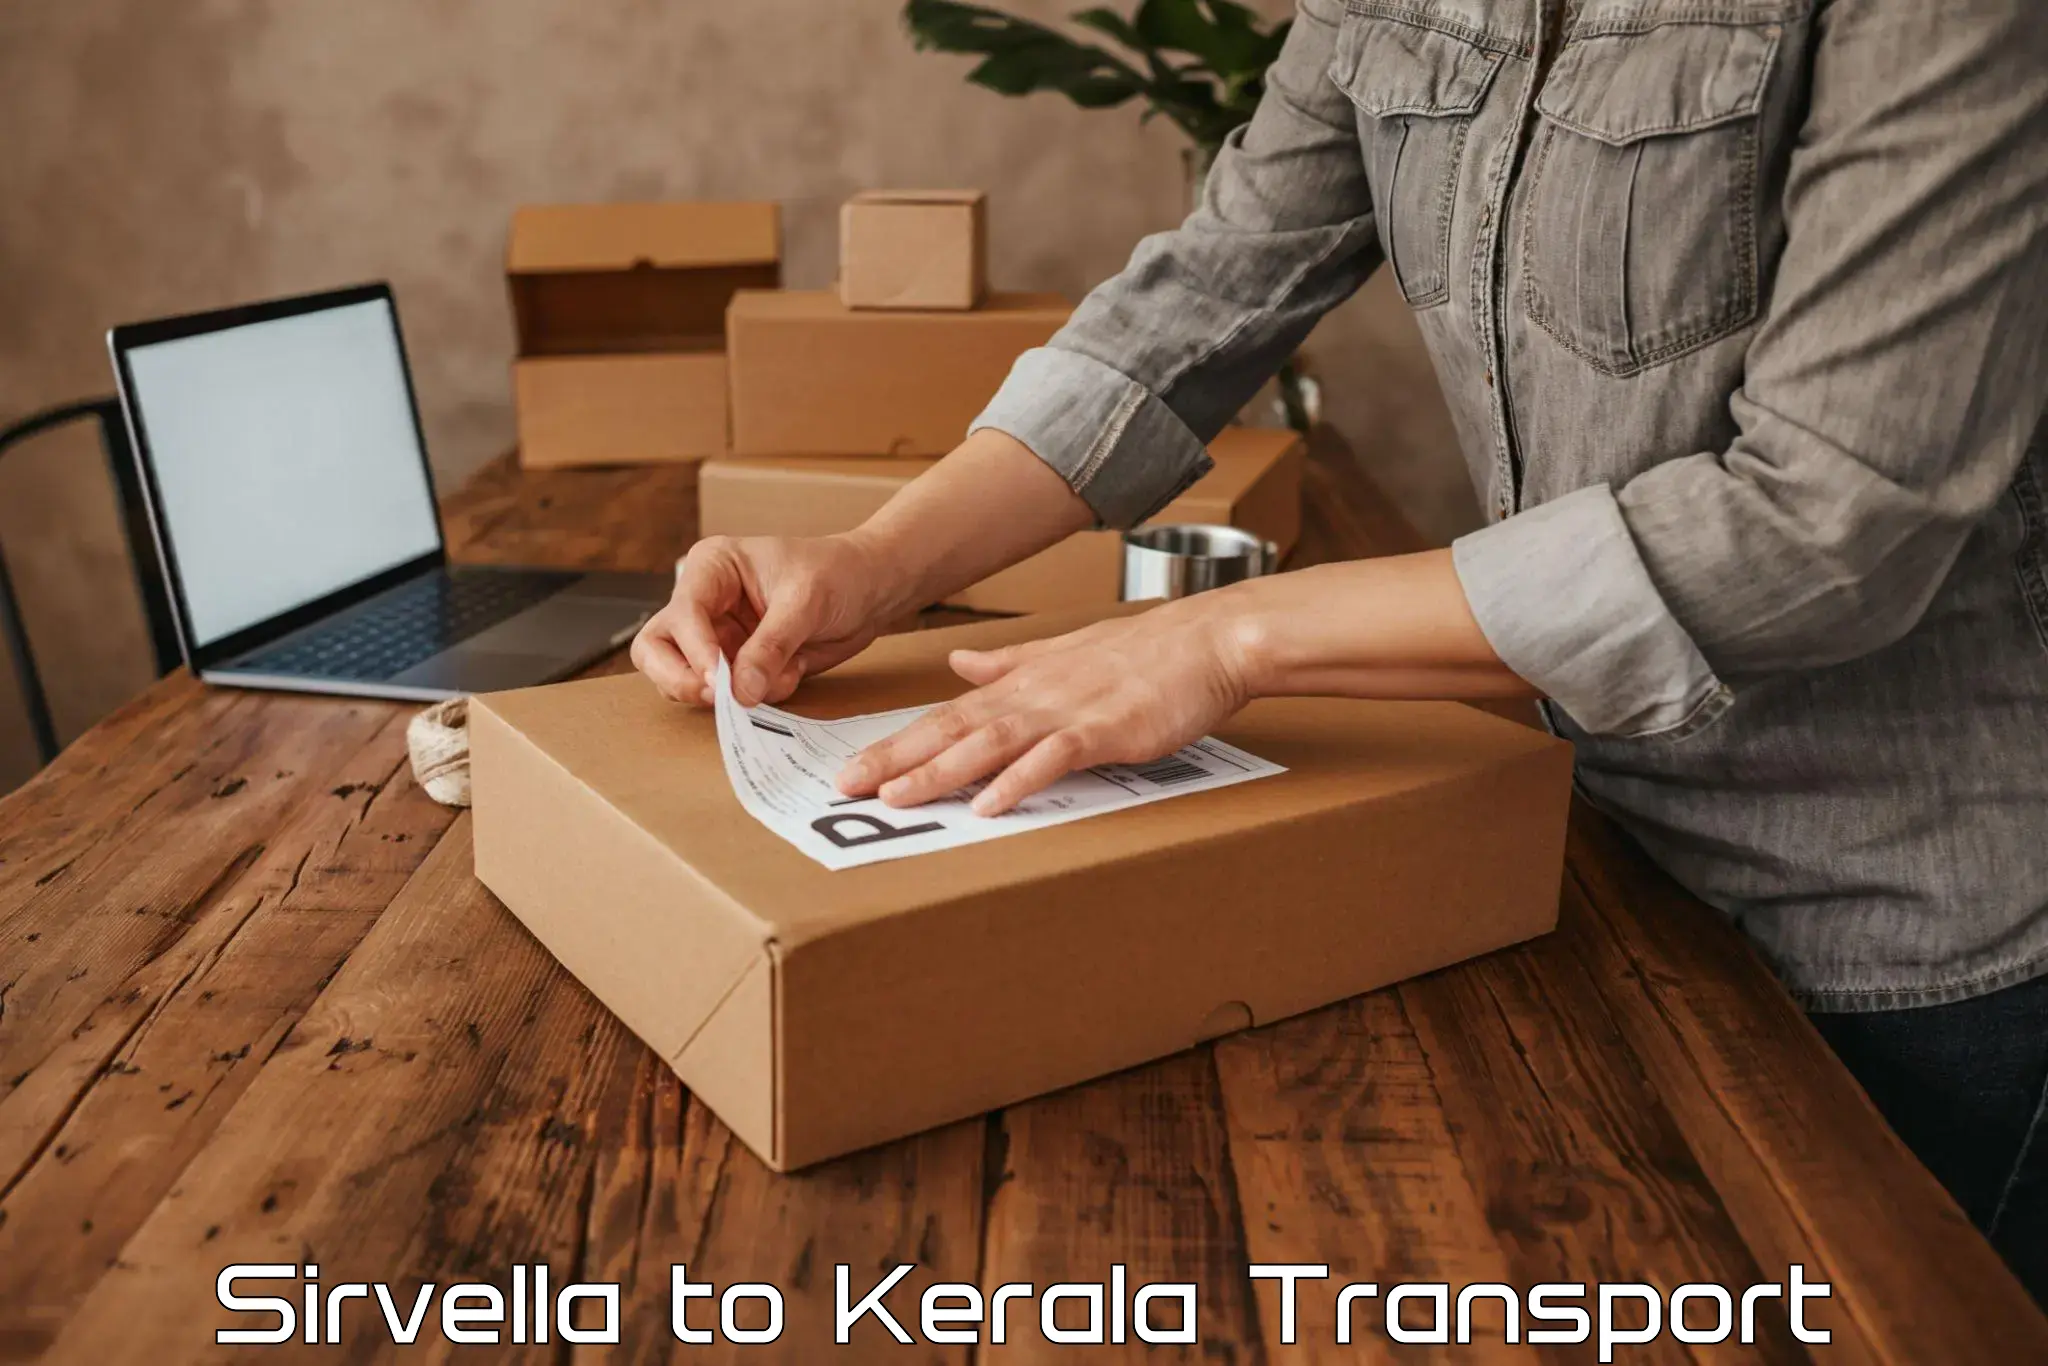 Container transport service Sirvella to Kerala